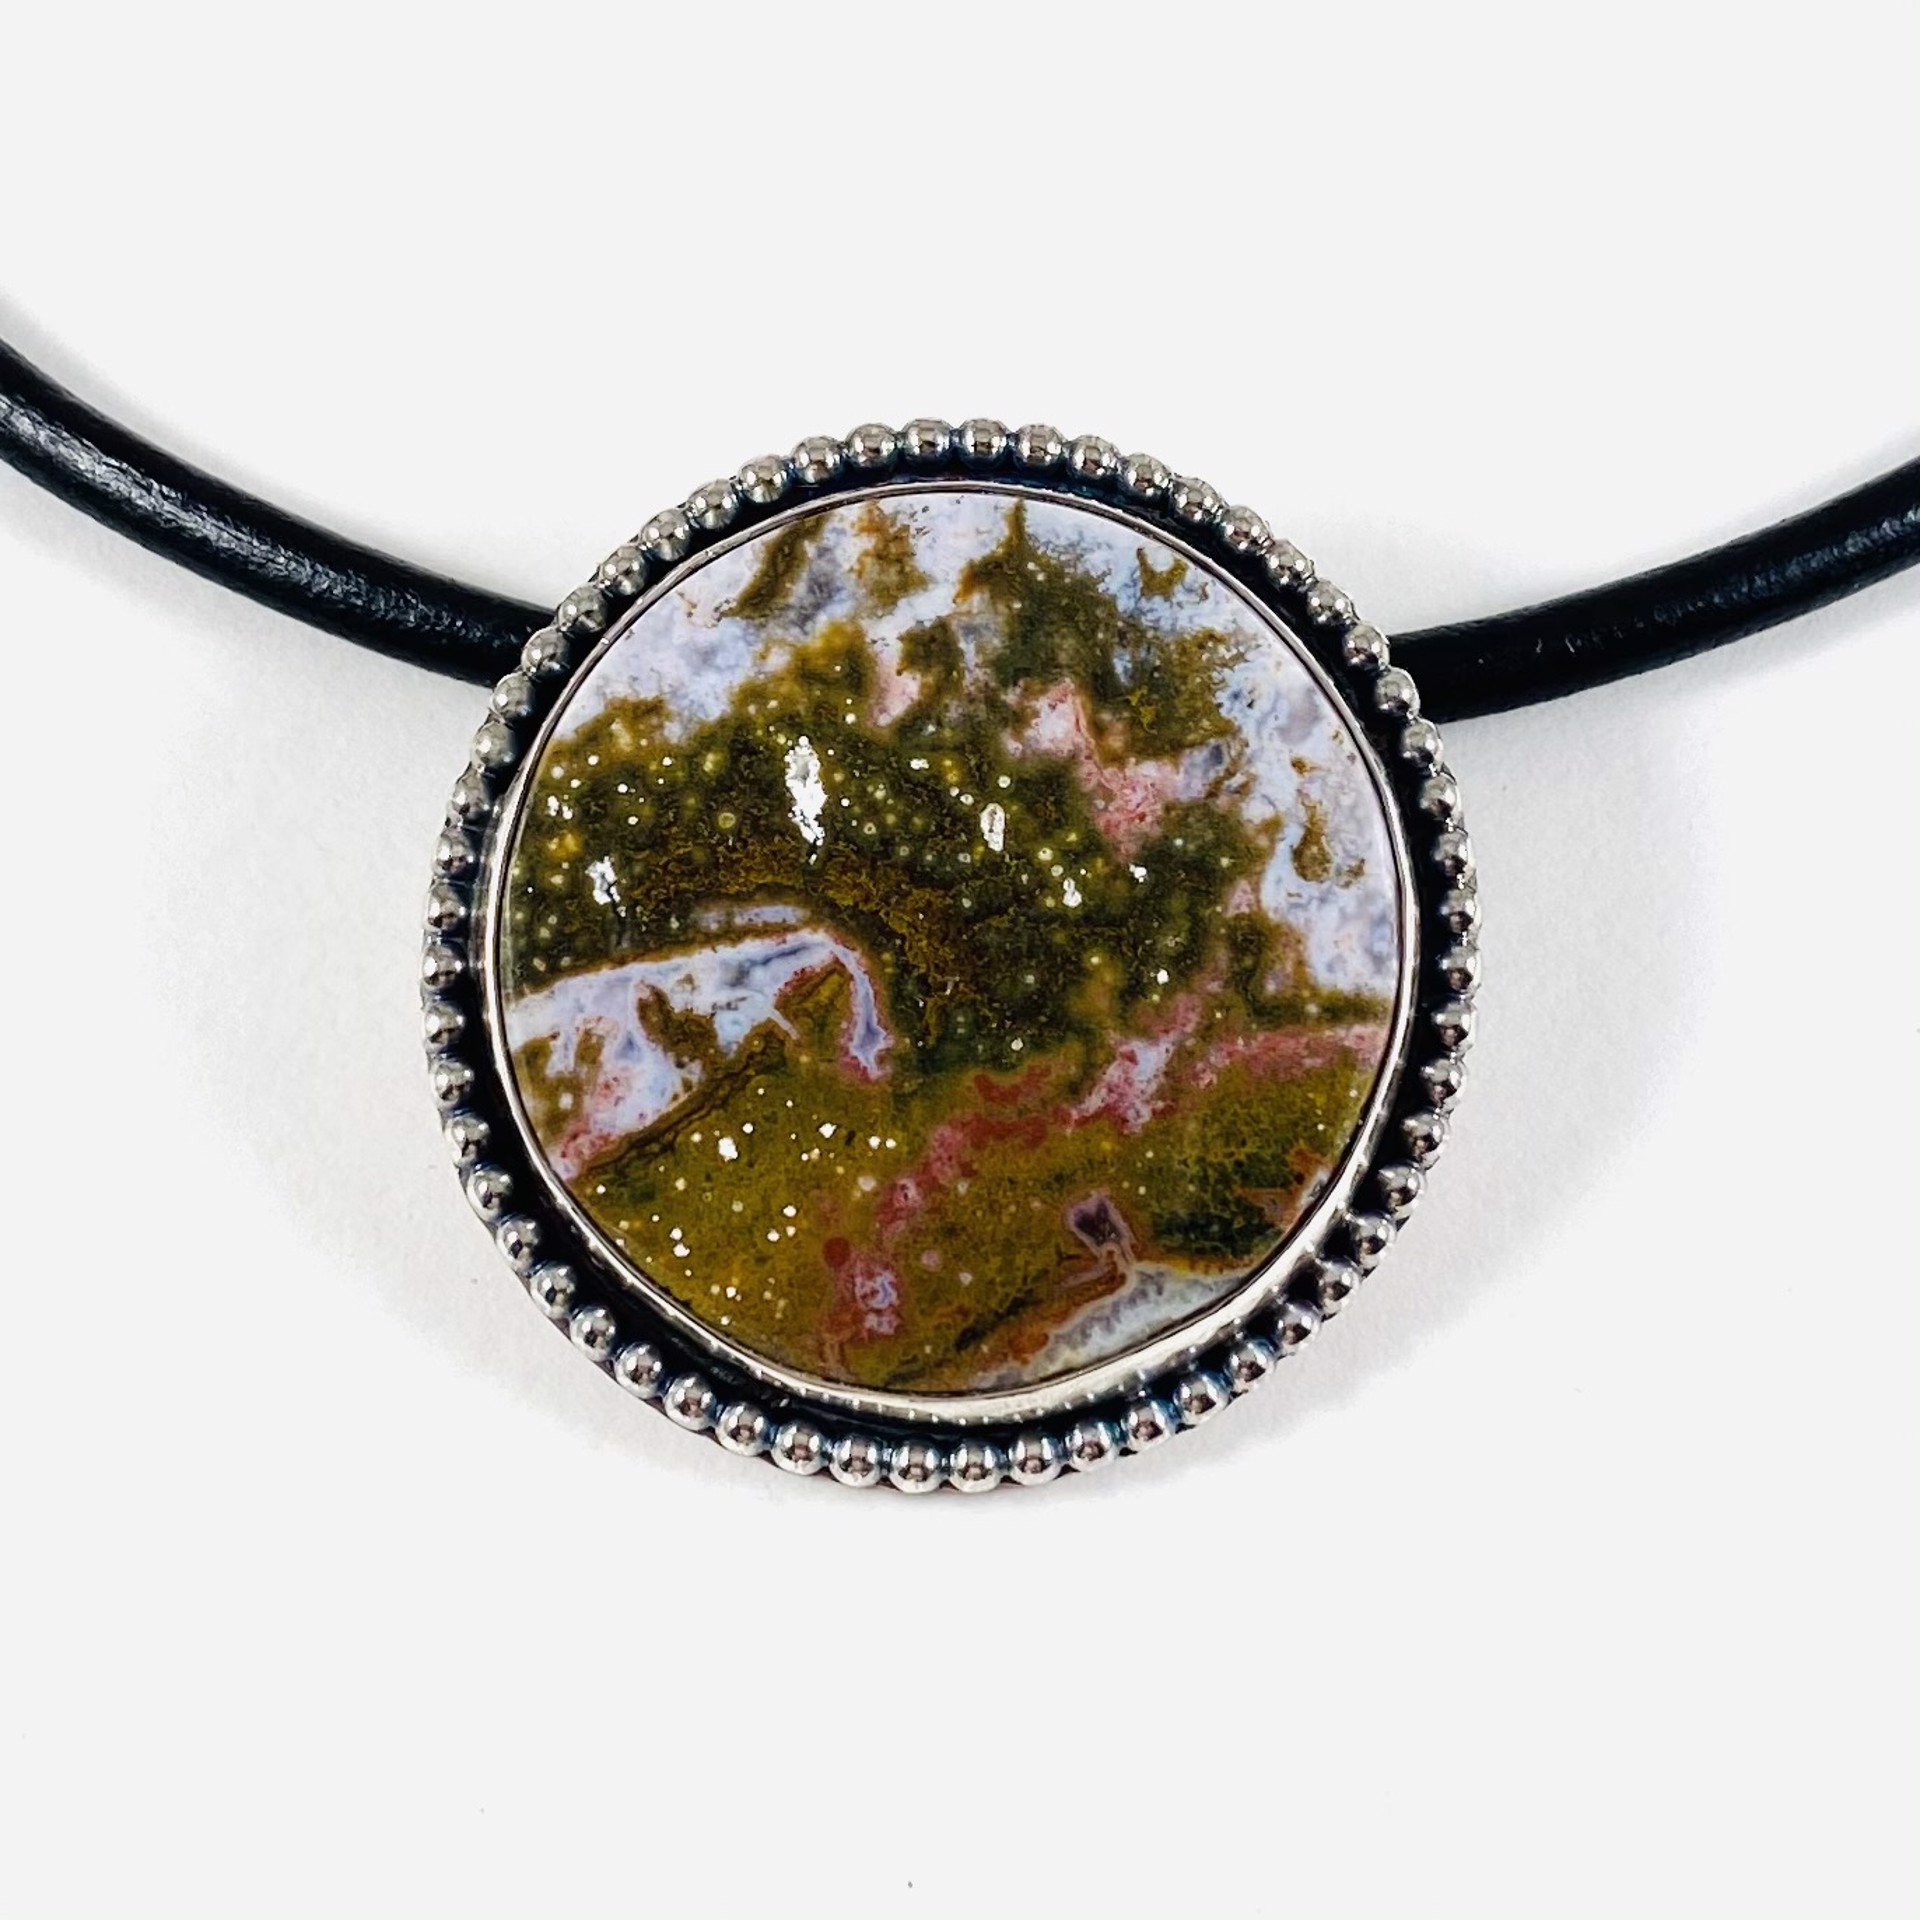 Ocean Jasper, Silver Pendant on Leather Cord Necklace AB21-32 by Anne Bivens